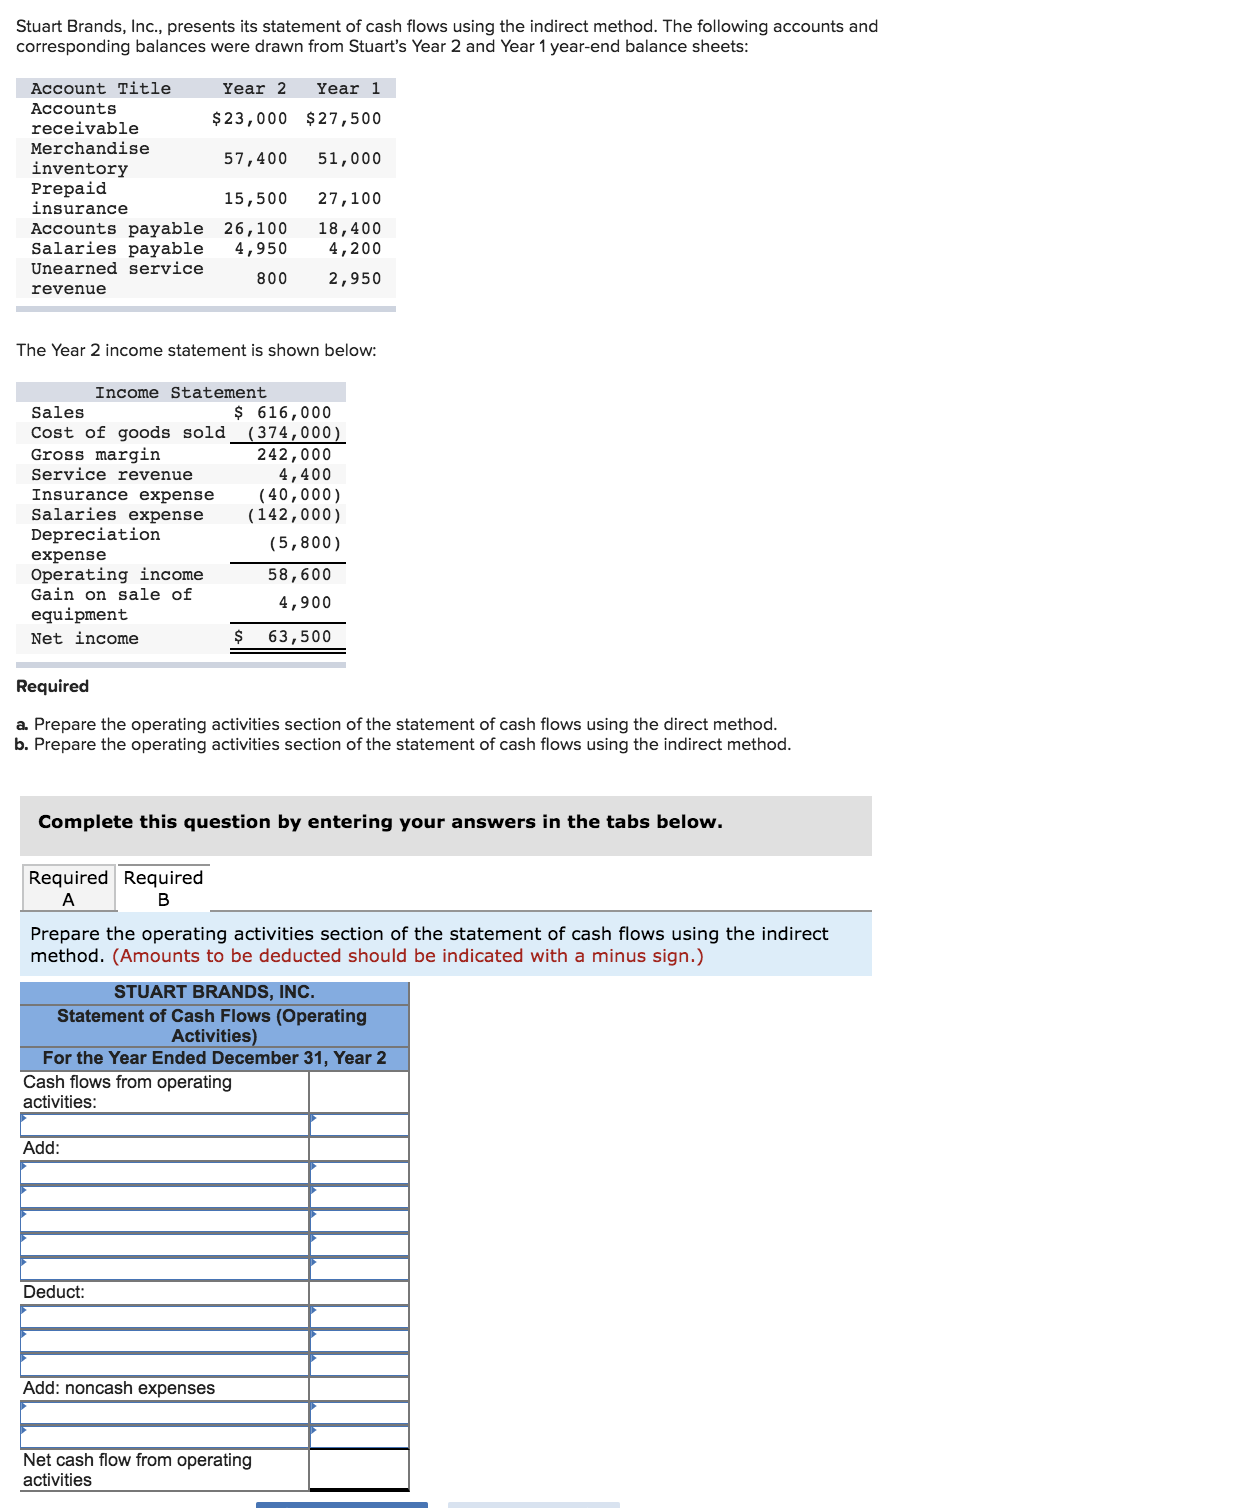 Stuart Brands, Inc., presents its statement of cash flows using the indirect method. The following accounts and
corresponding balances were drawn from Stuart's Year 2 and Year 1 year-end balance sheets:
Account Title
Year 2
Year 1
Accounts
$23,000 $27,500
receivable
Merchandise
57,400
51,000
inventory
Prepaid
insurance
15,500
27,100
Accounts payable 26,100
Salaries payable
Unearned service
18,400
4,200
4,950
2,950
800
revenue
The Year 2 income statement is shown below:
Income Statement
Sales
$616,000
Cost of goods sold (374,000)
Gross margin
Service revenue
242,000
4,400
(40,000)
(142,000)
Insurance expense
Salaries expense
Depreciation
(5,800)
expense
Operating income
Gain on sale of
58,600
4,900
equipment
63,500
Net income
Required
a Prepare the operating activities section of the statement of cash flows using the direct method.
b. Prepare the operating activities section of the statement of cash flows using the indirect method.
Complete this question by entering your answers in the tabs below.
Required Required
A
В
Prepare the operating activities section of the statement of cash flows using the indirect
method. (Amounts to be deducted should be indicated with a minus sign.)
STUART BRANDS, INC.
Statement of Cash Flows (Operating
Activities)
For the Year Ended December 31, Year 2
Cash flows from operating
activities:
Add:
Deduct
Add: noncash expenses
Net cash flow from operating
activities
